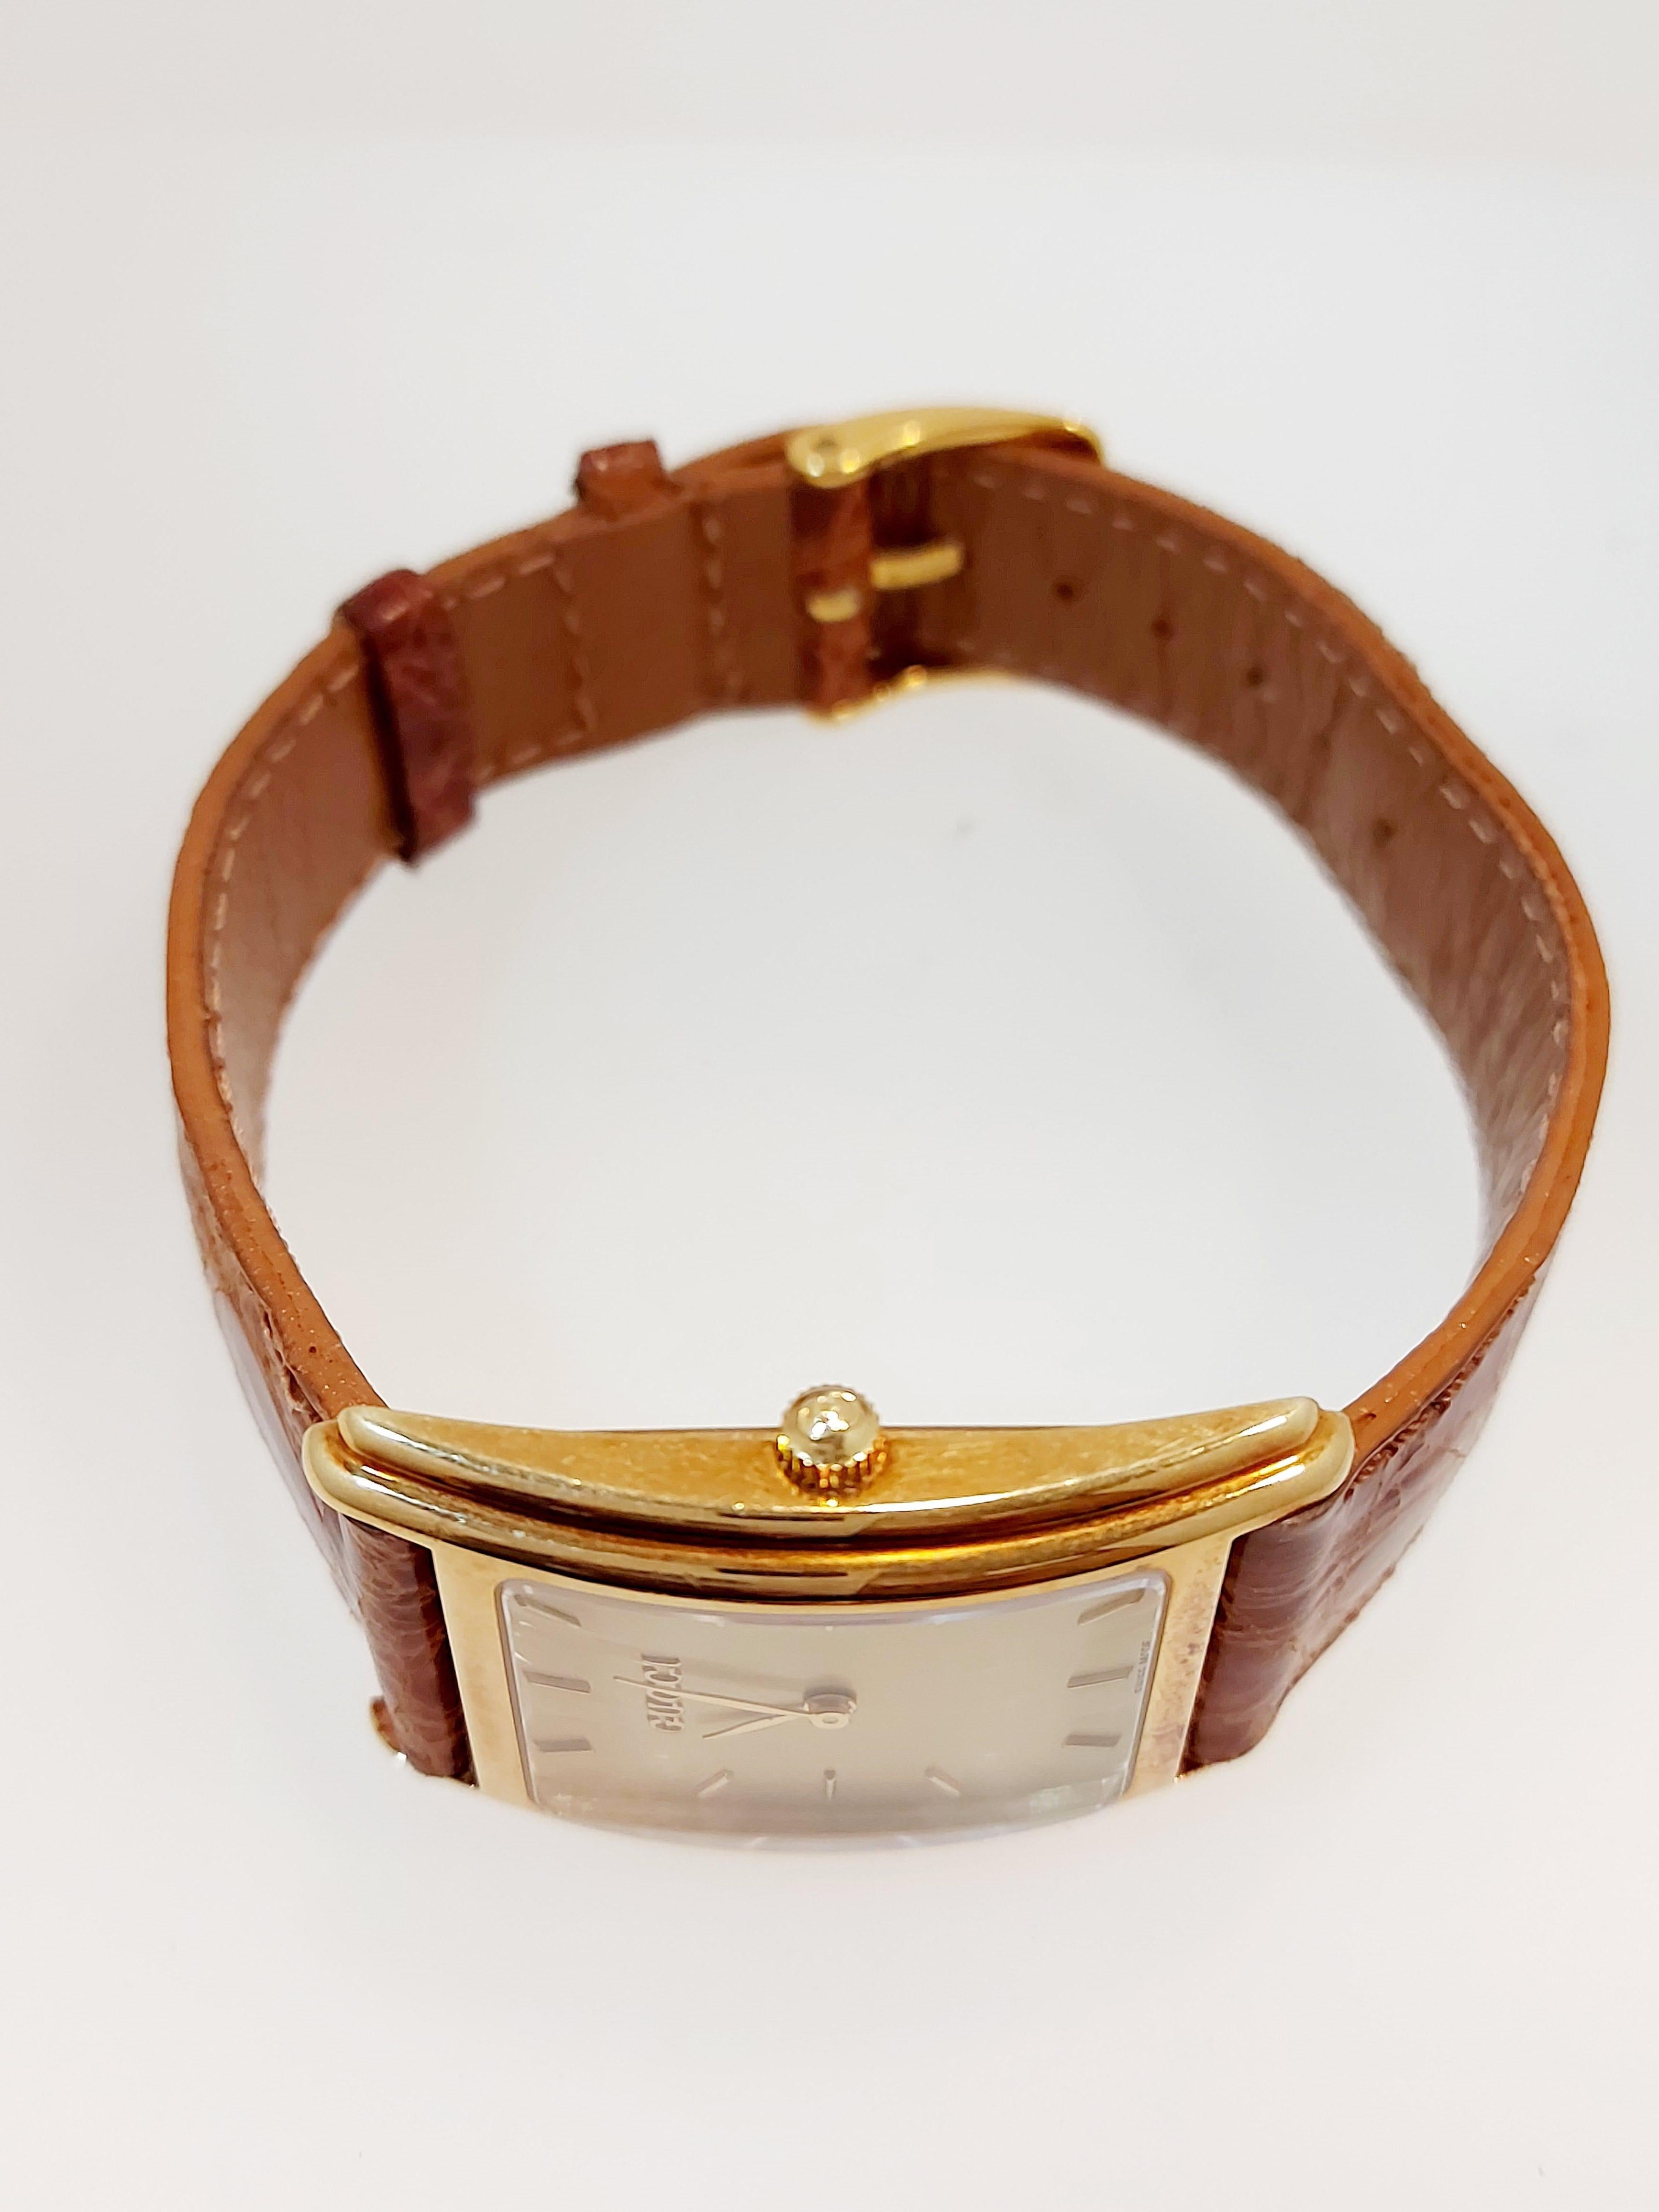 gucci watch brown leather strap